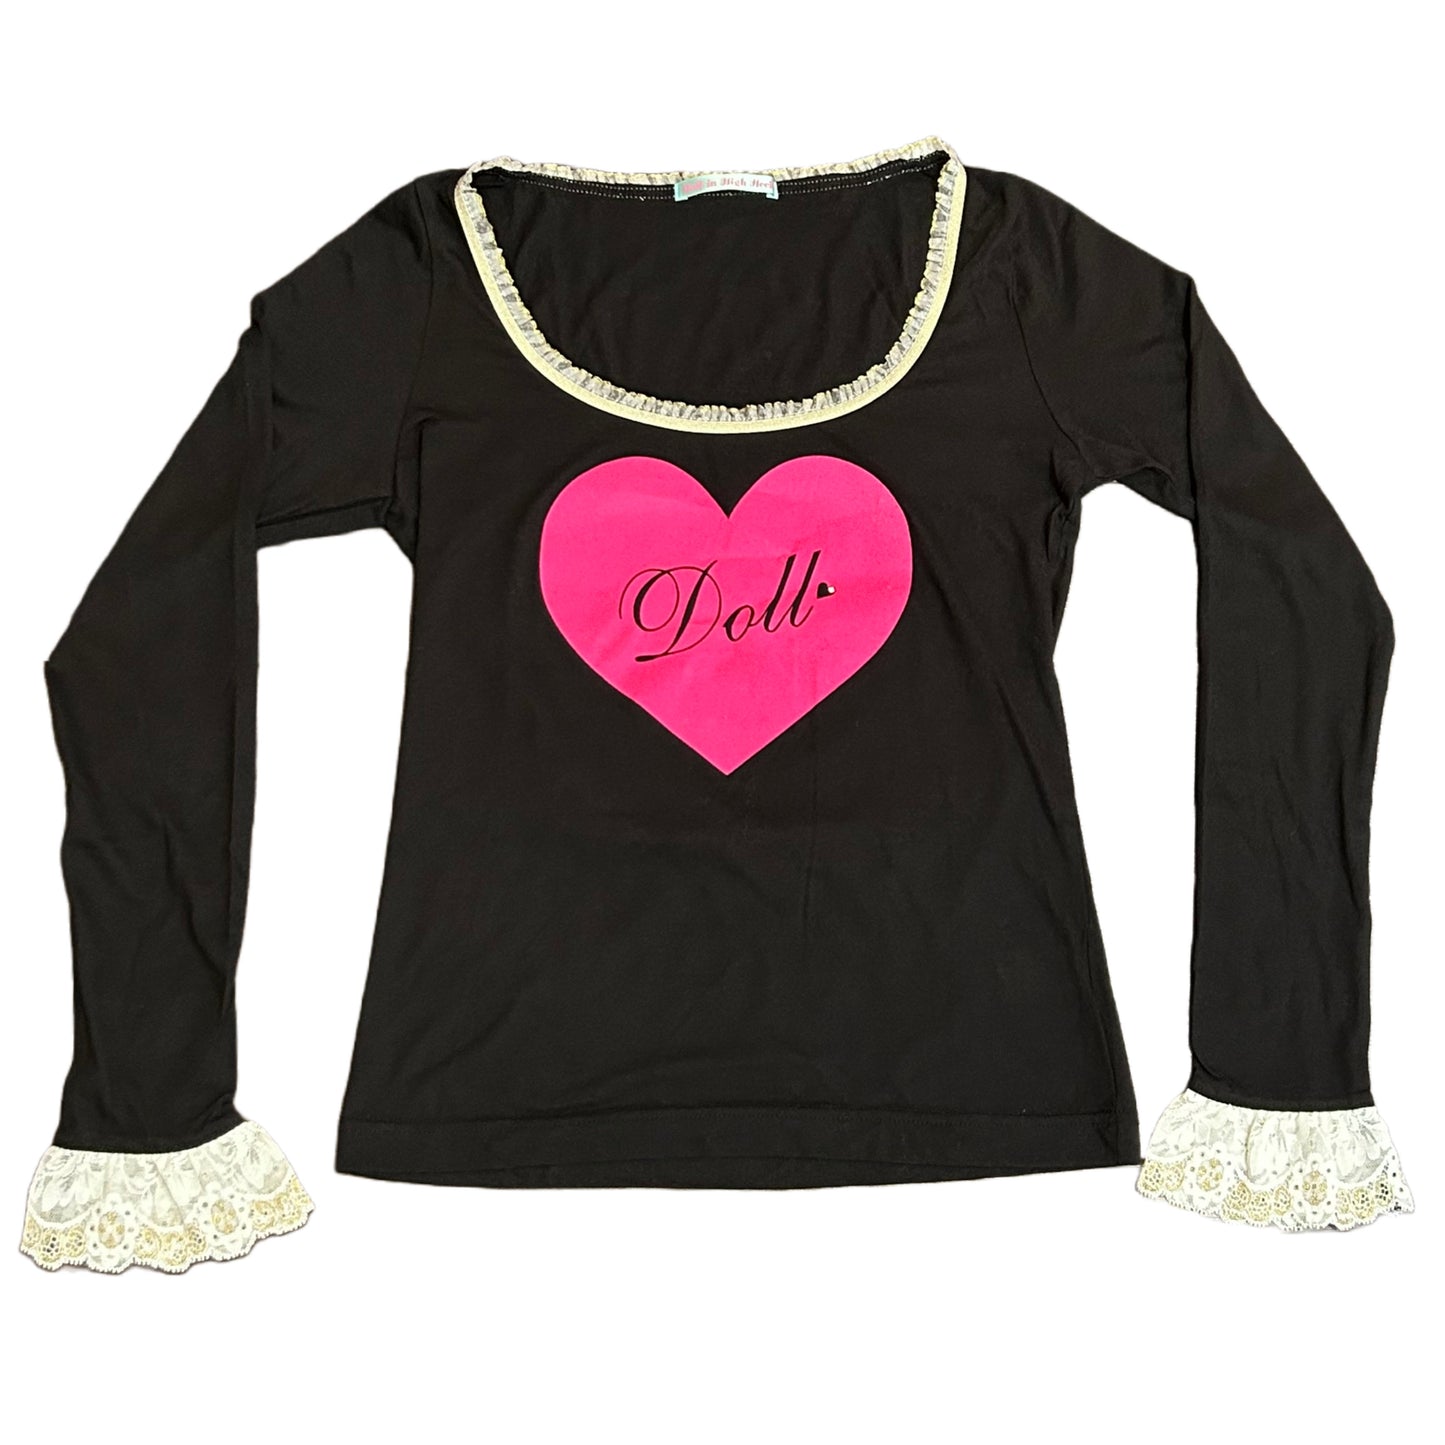 Frilly doll top